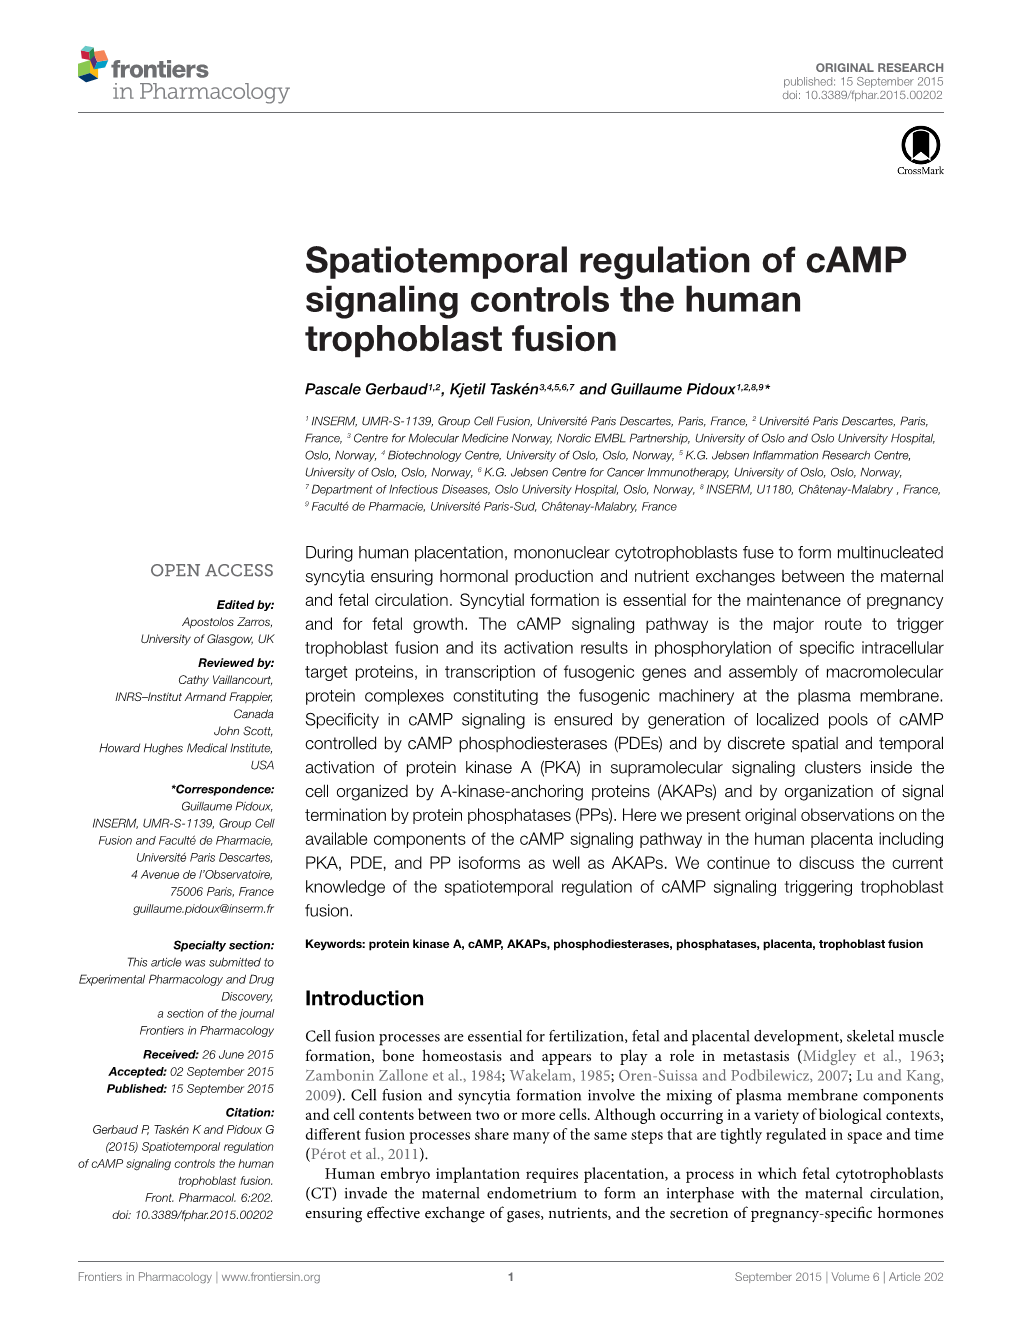 Spatiotemporal Regulation of Camp Signaling Controls the Human Trophoblast Fusion